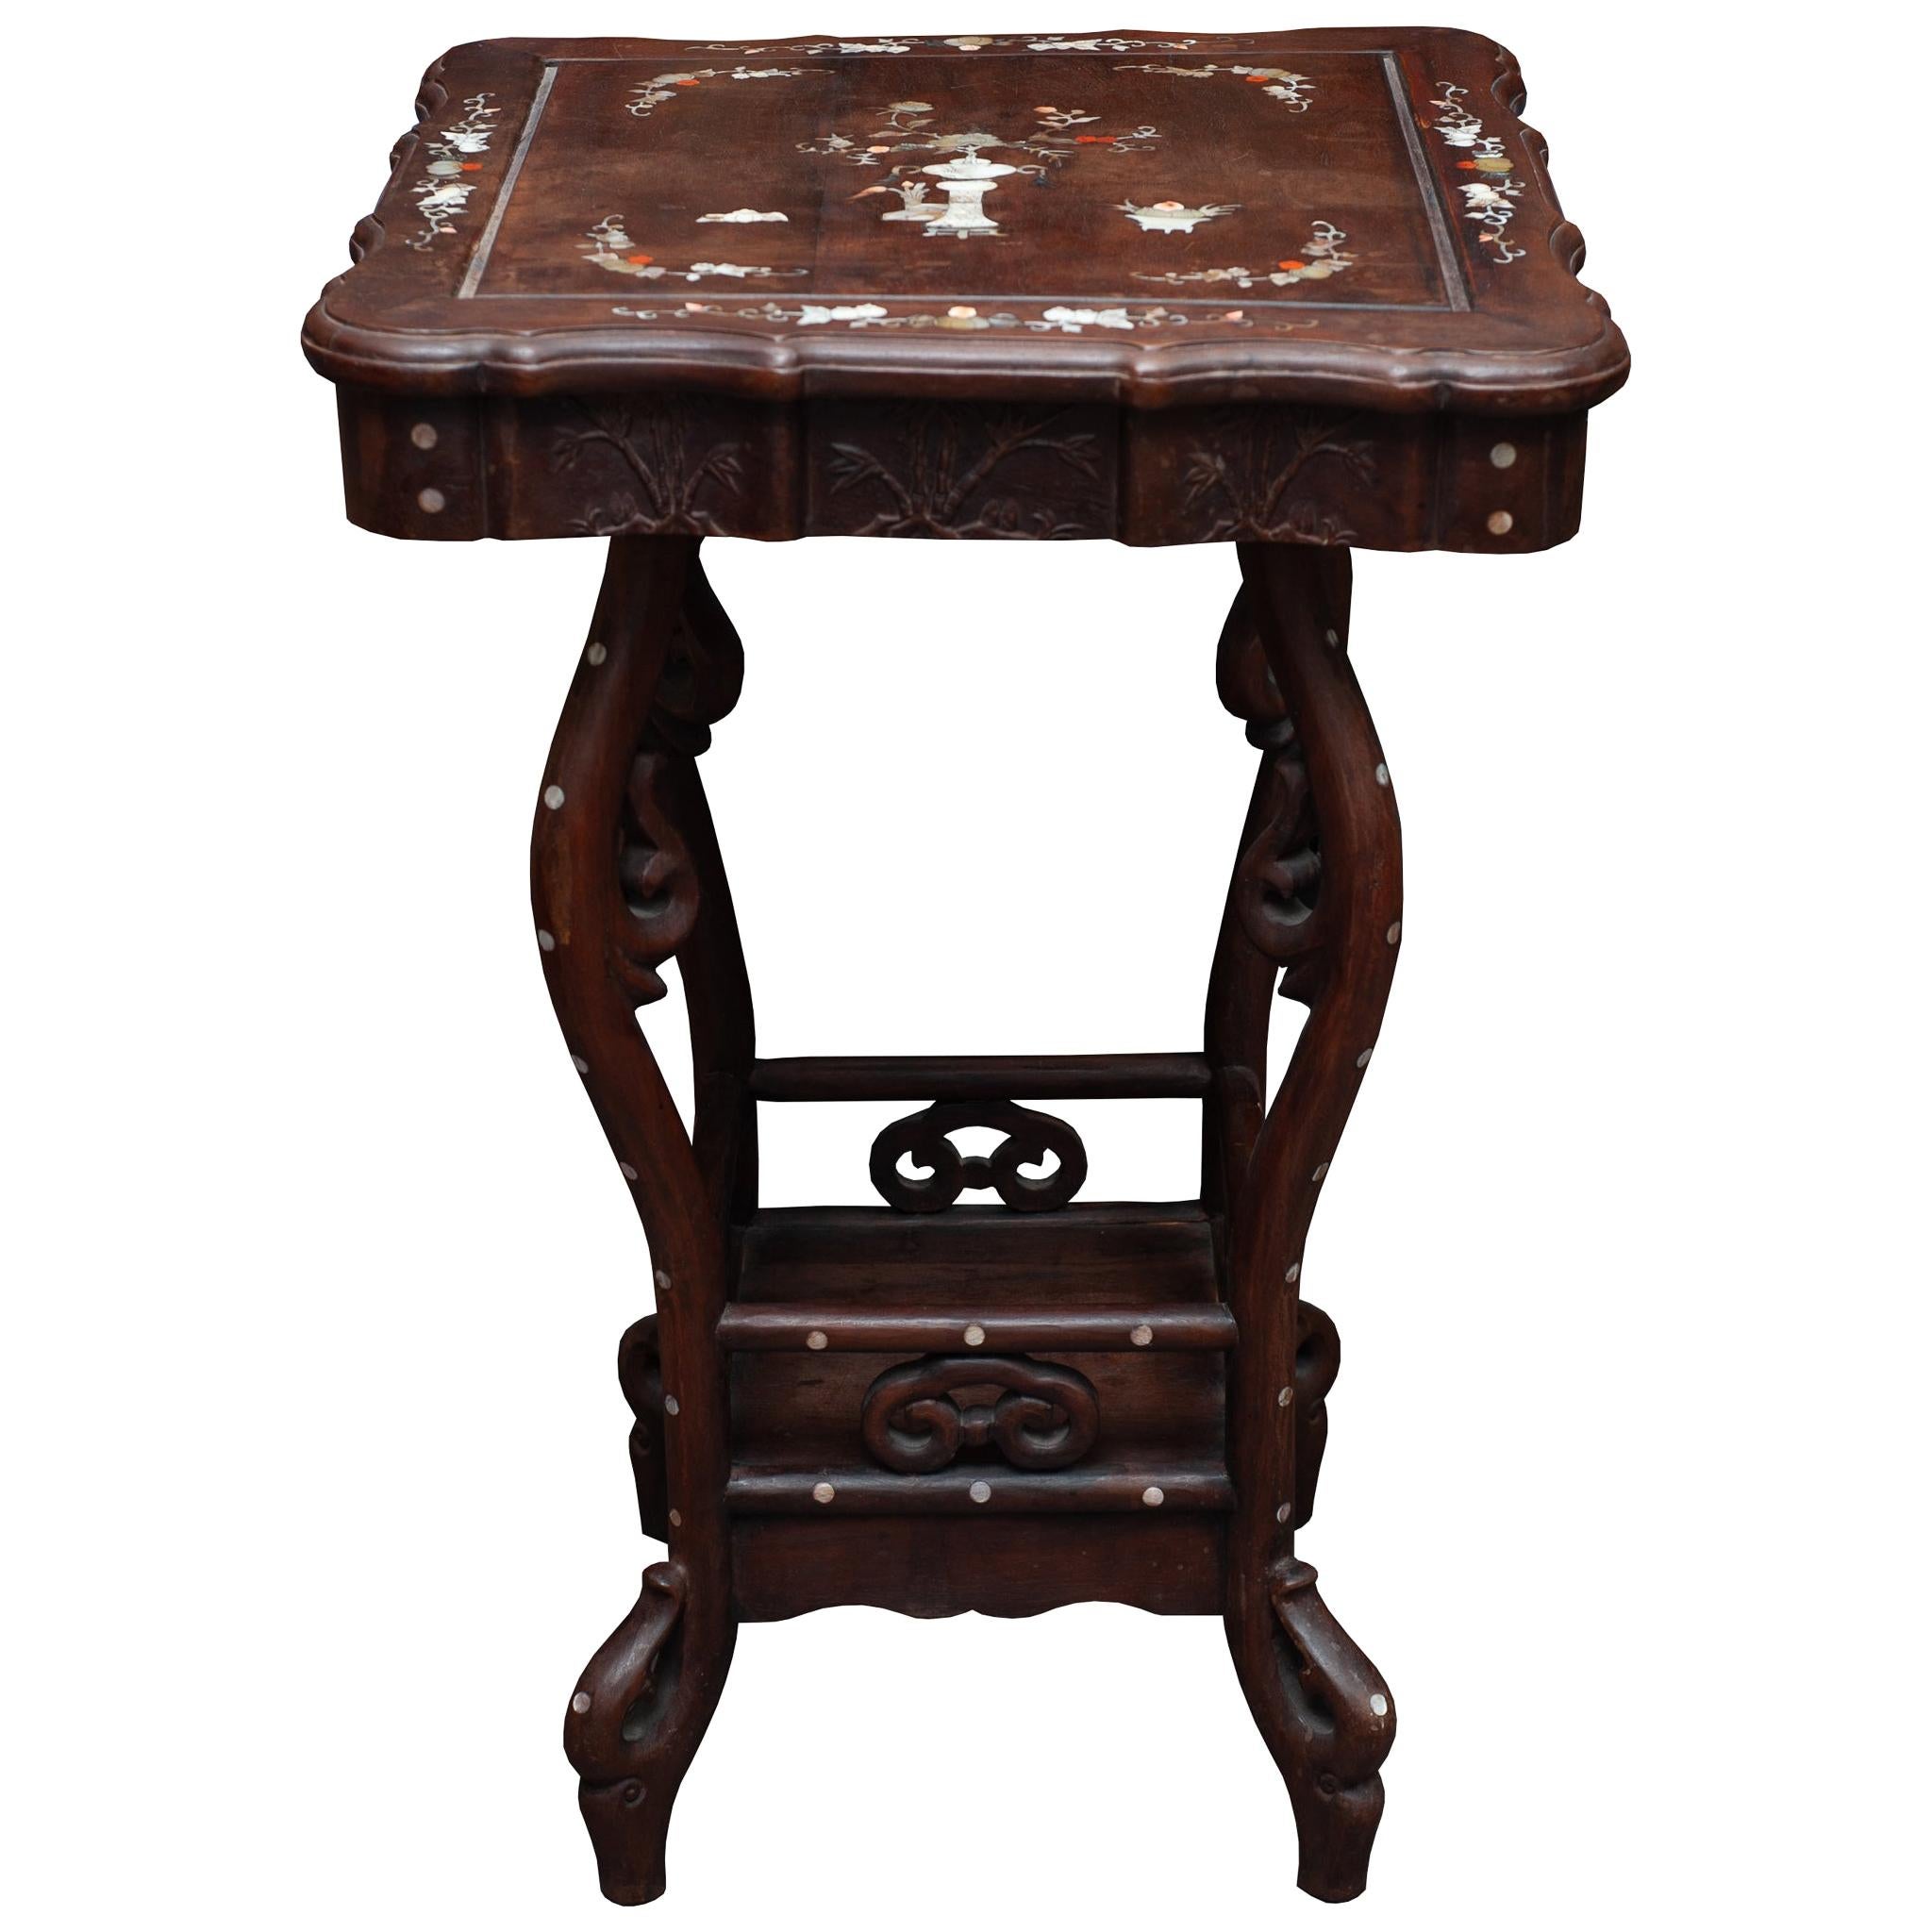 Antique Chinese Carved Wood Table with Mother of Pearl Inlay